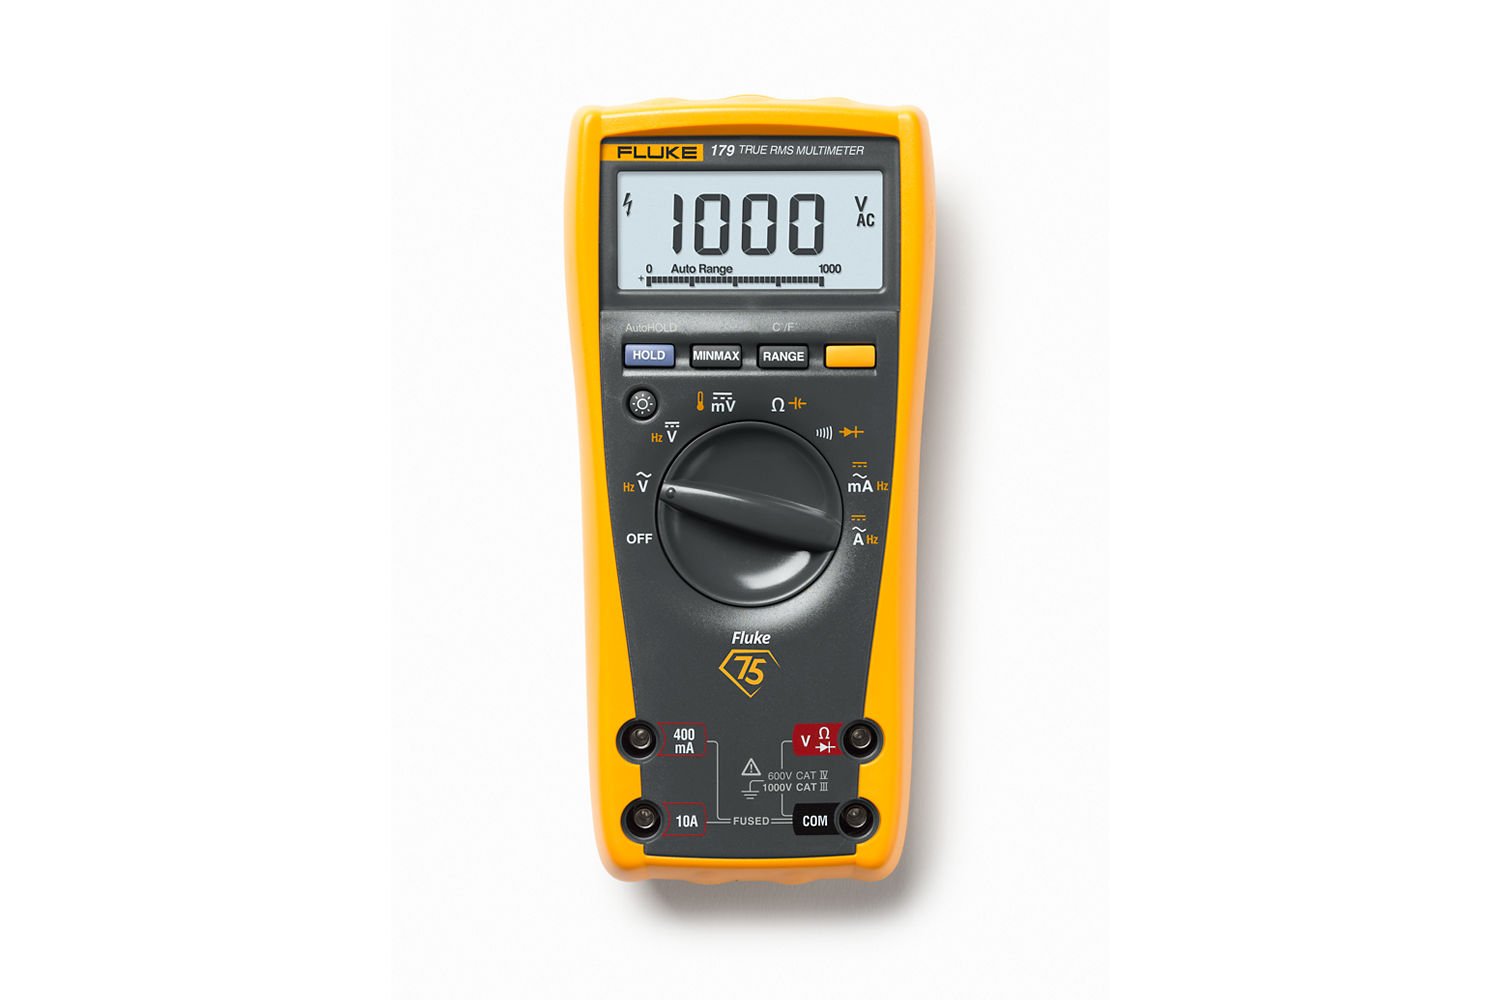 Fluke 179 Special Edition with Fluke 75 years logo at a special price PLUS a FREE TB25